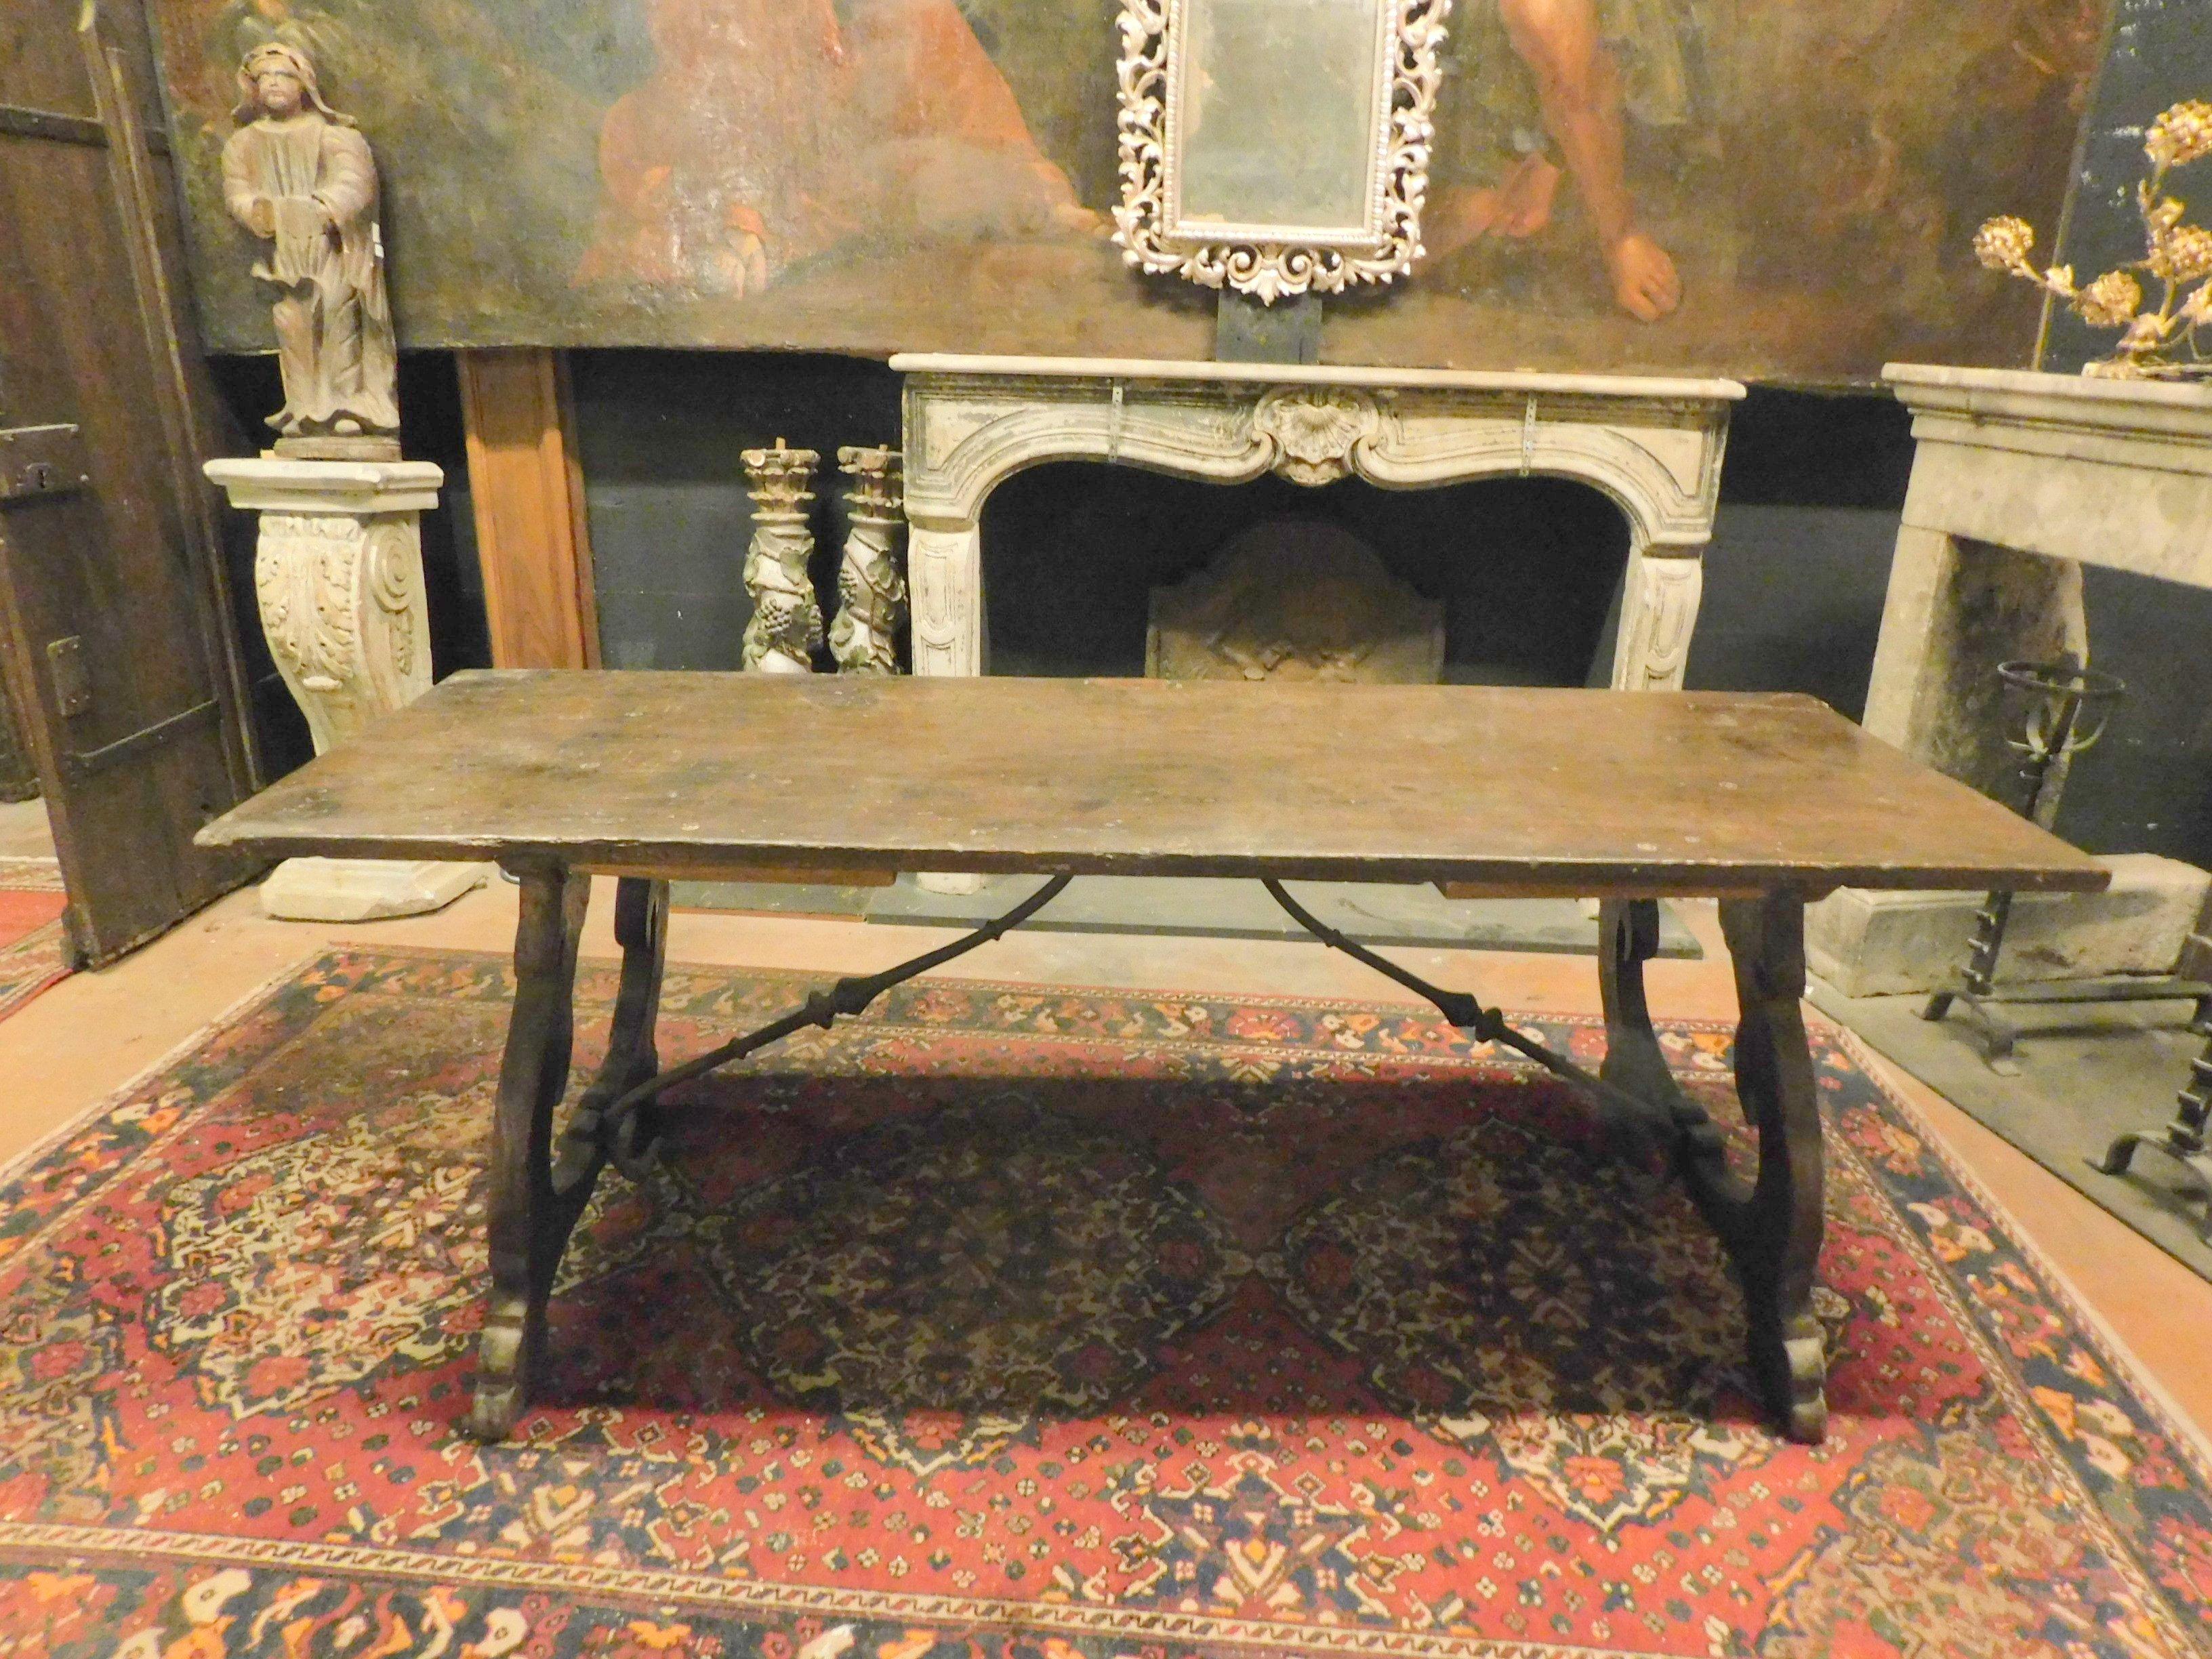 Antique refectory table in walnut and oak, single plank and legs carved with iron, built in the 18th century for an ancient house in Spain.
Perfect for a tasteful kitchen or a classic dining room, also suitable for a modern room, perhaps with very